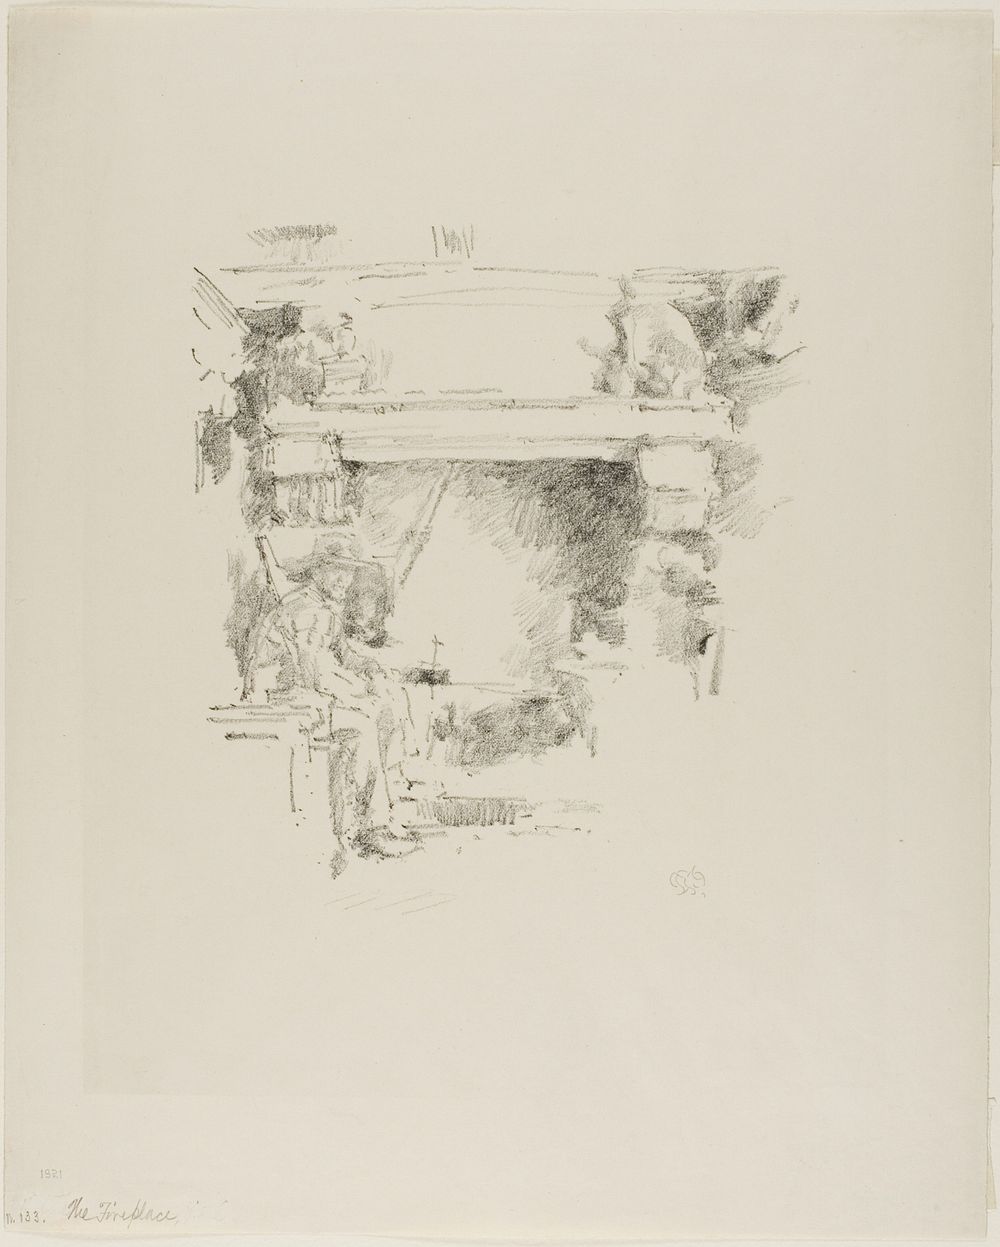 The Fireplace by James McNeill Whistler